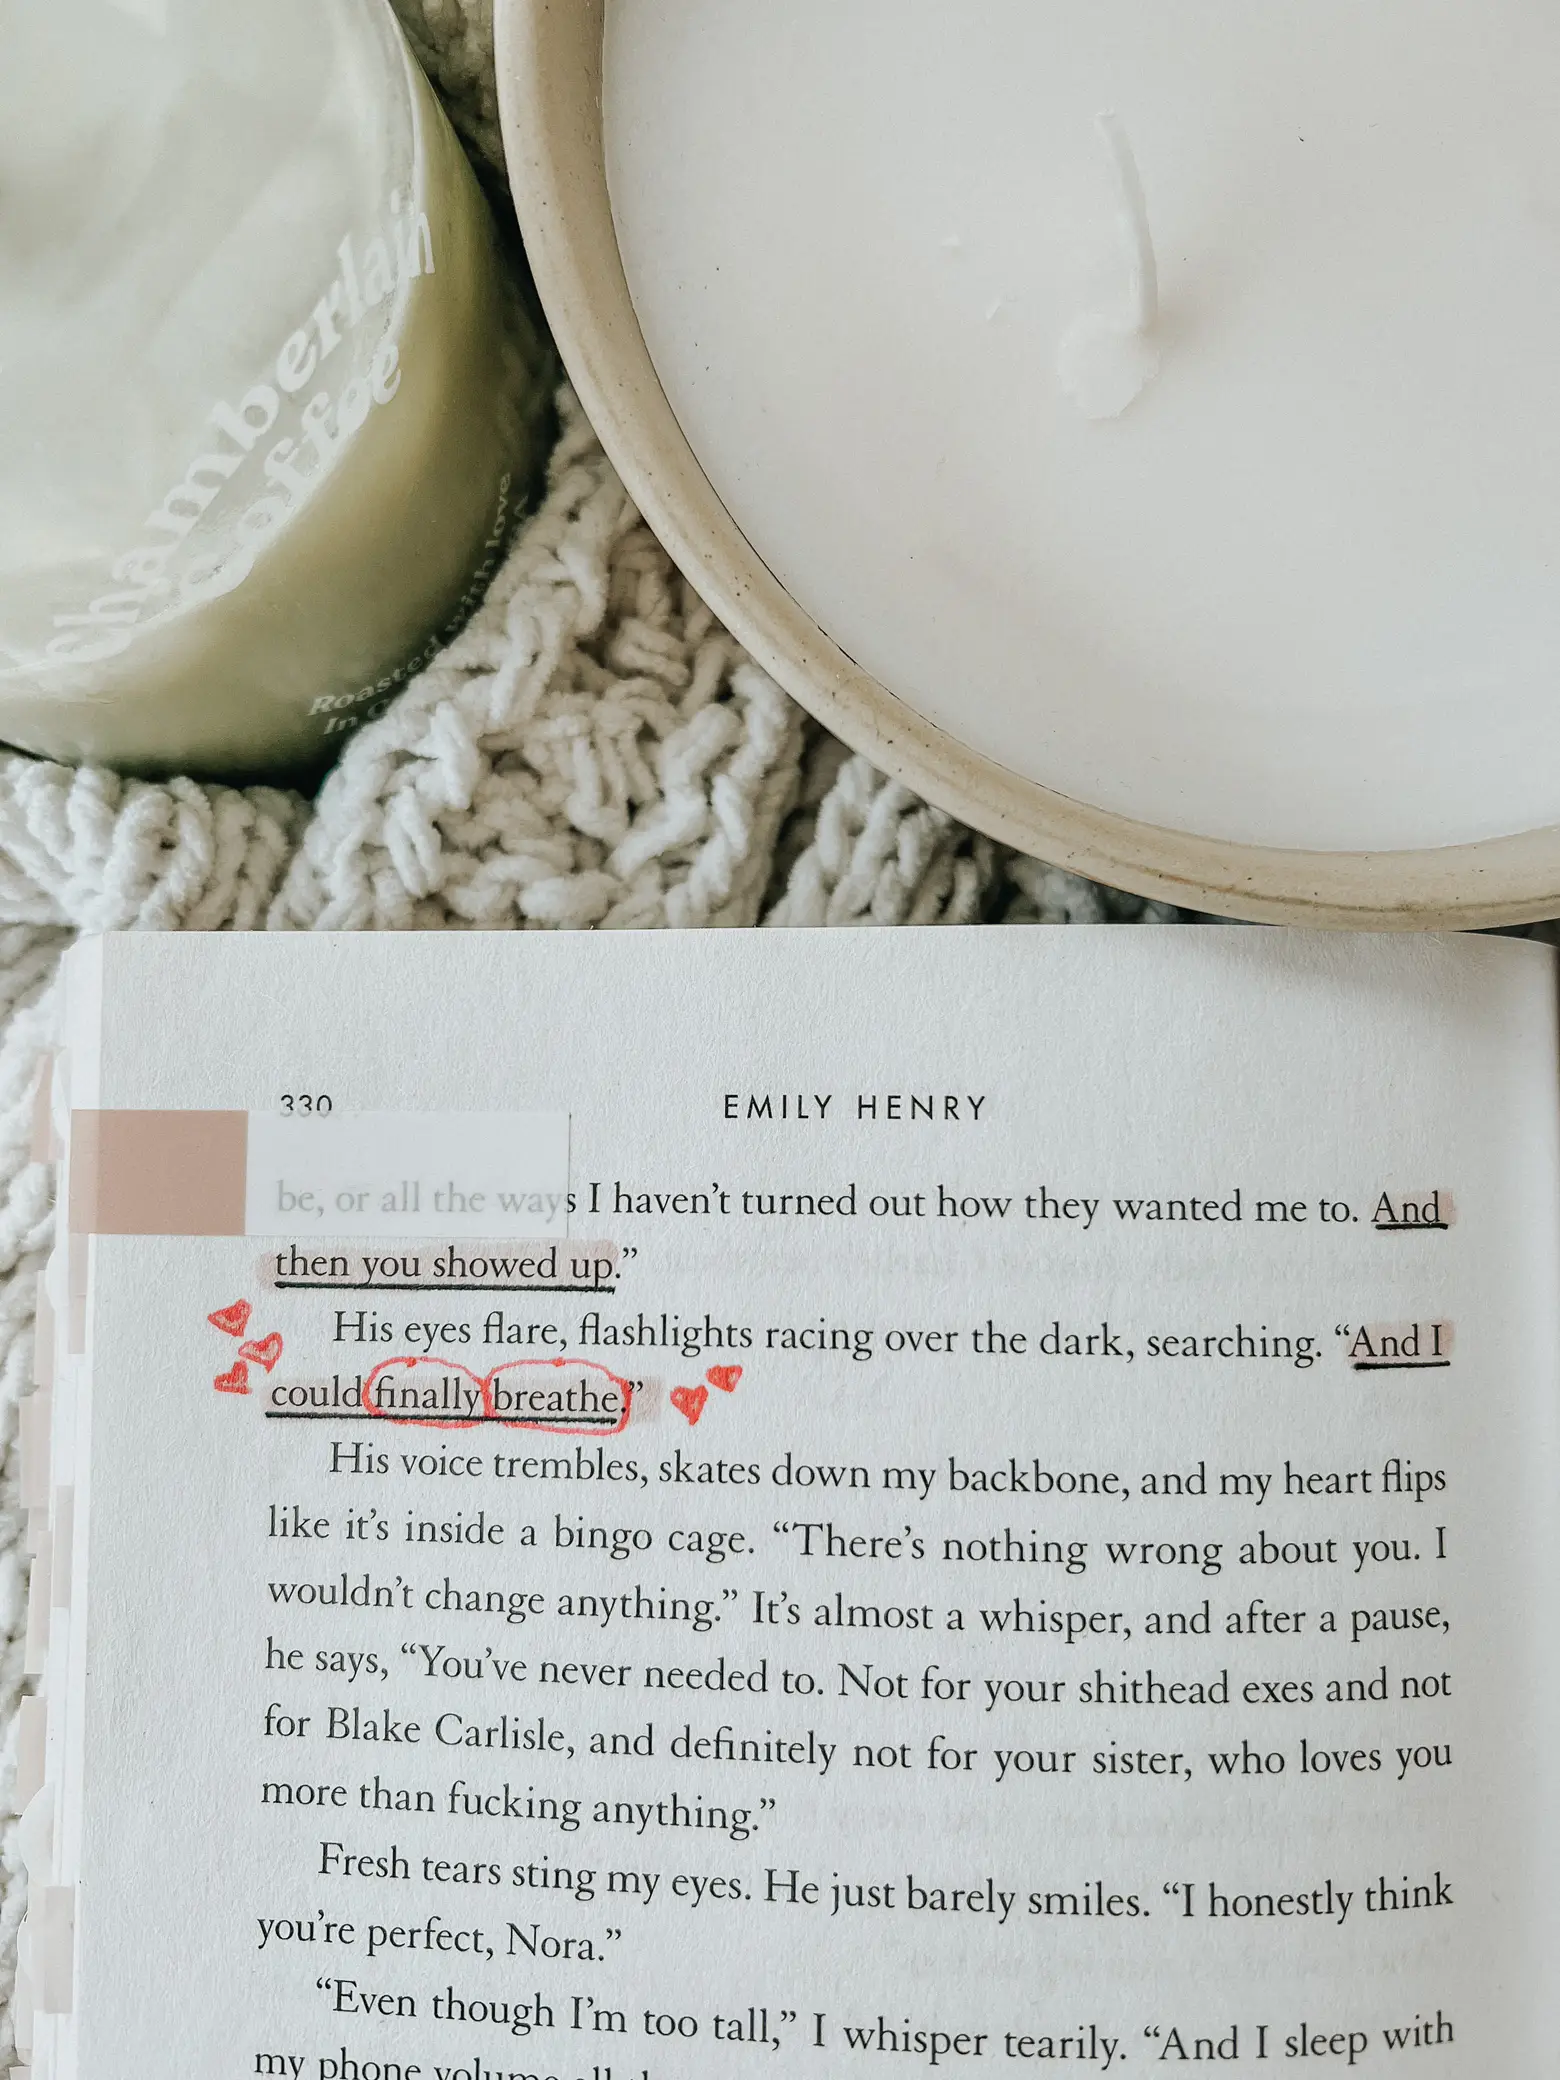  A book is open to a page with a red marker pointing to a passage. The passage is about Emily Henry.